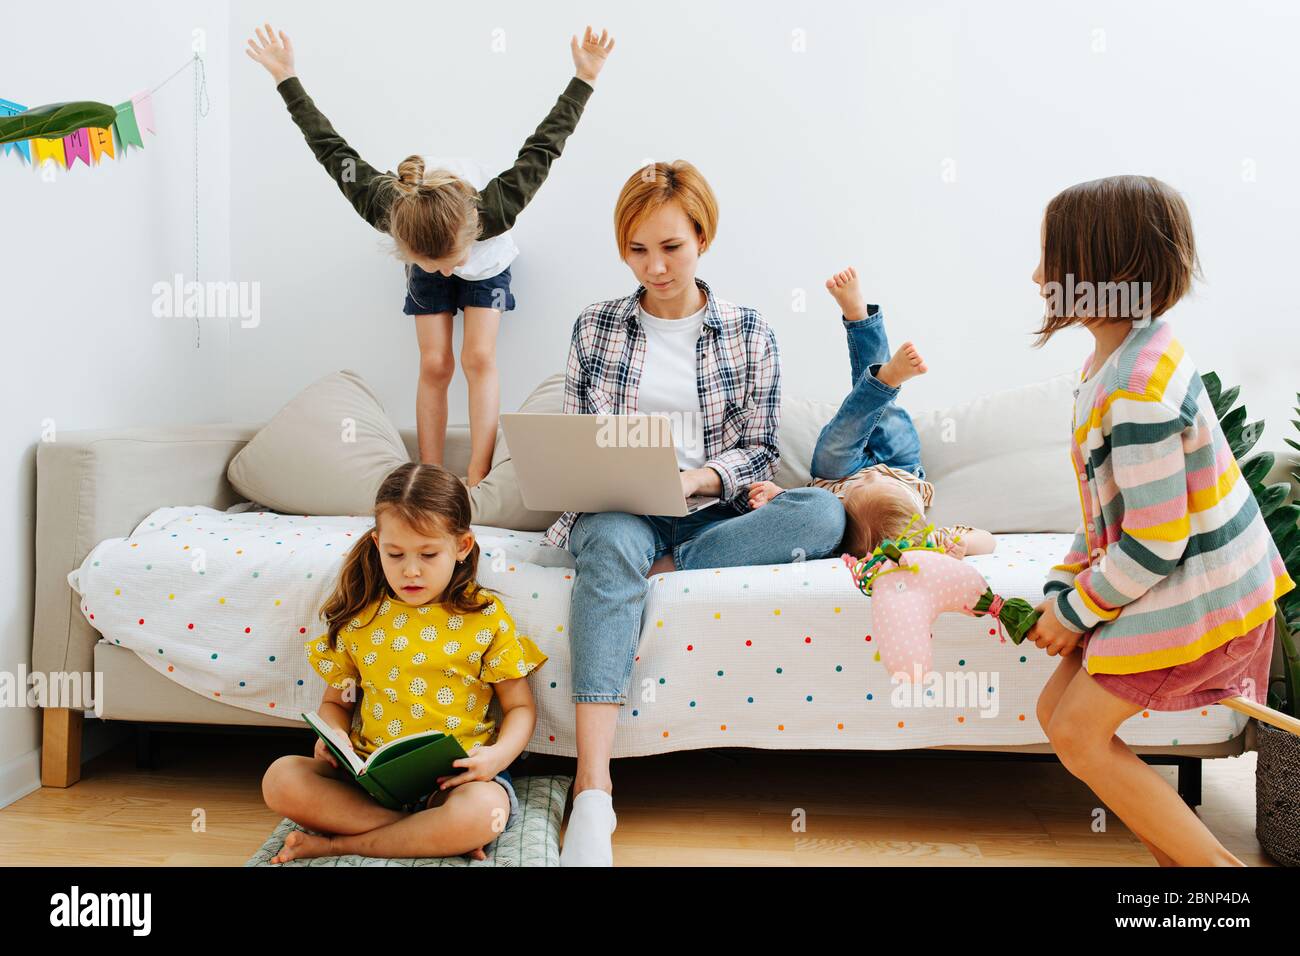 Freelancer woman working on a laptop next to her loud kids Stock Photo